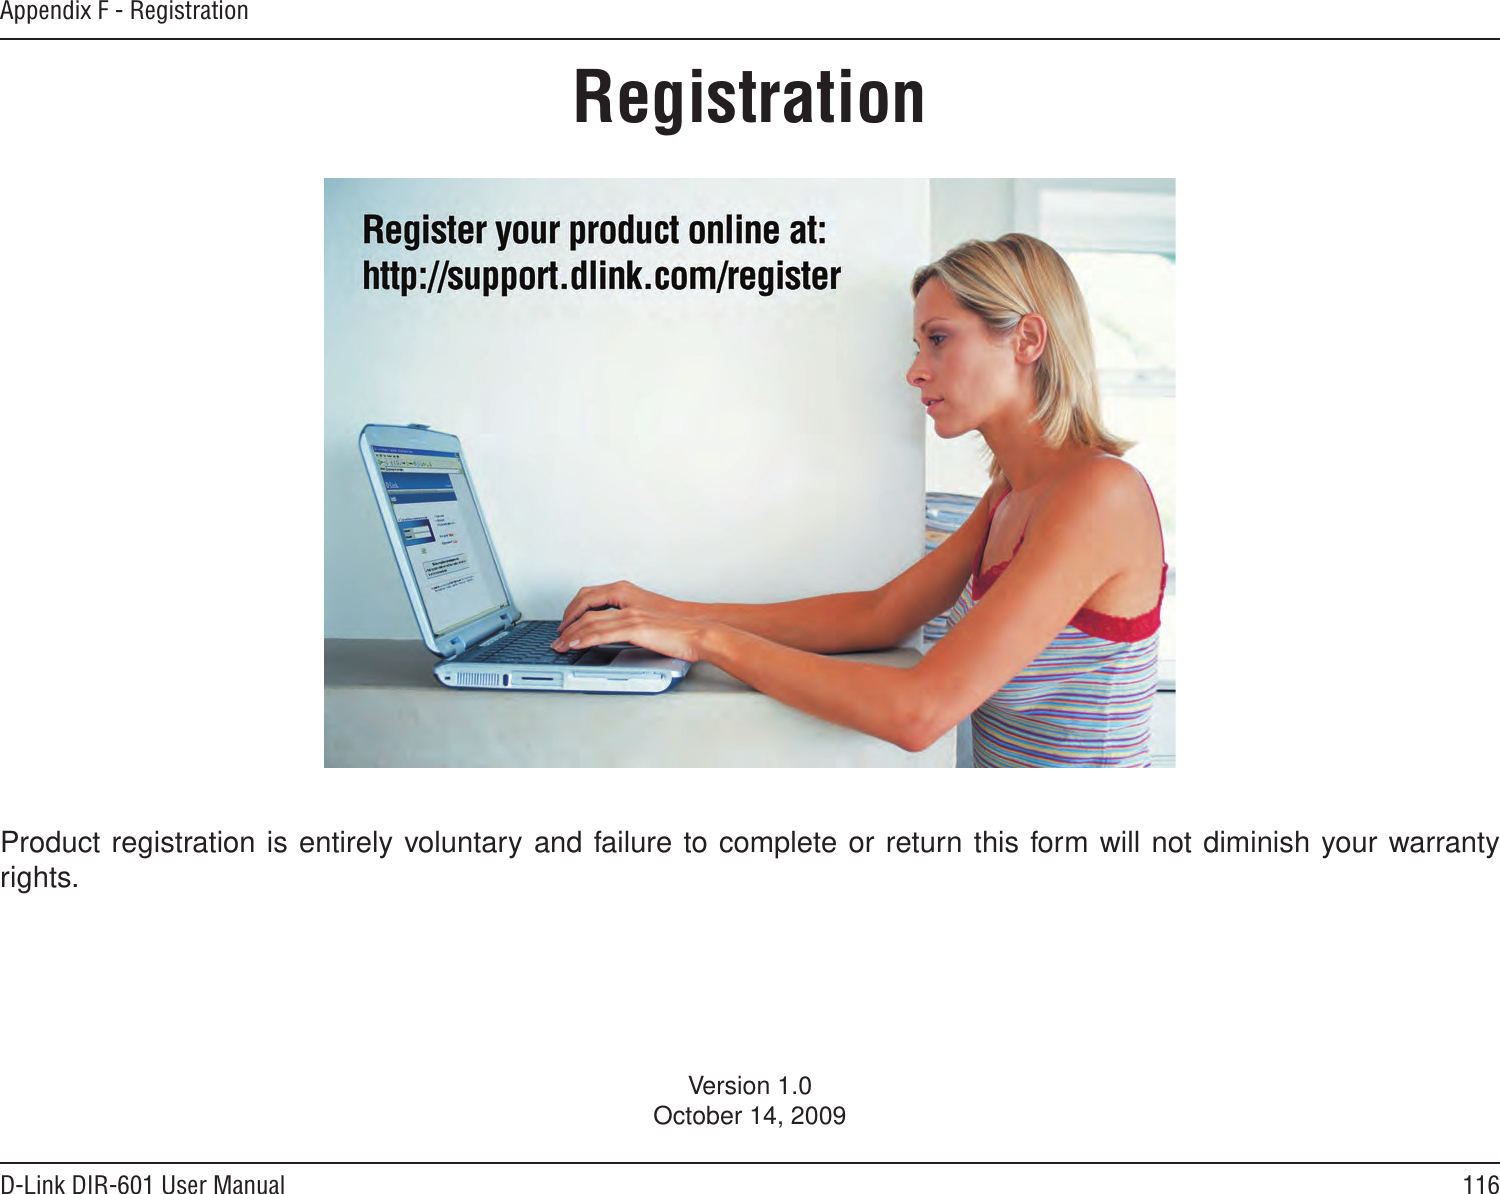 116D-Link DIR-601 User ManualAppendix F - RegistrationVersion 1.0October 14, 2009Product registration is entirely voluntary and failure to complete or return this form will not diminish your warranty rights.Registration